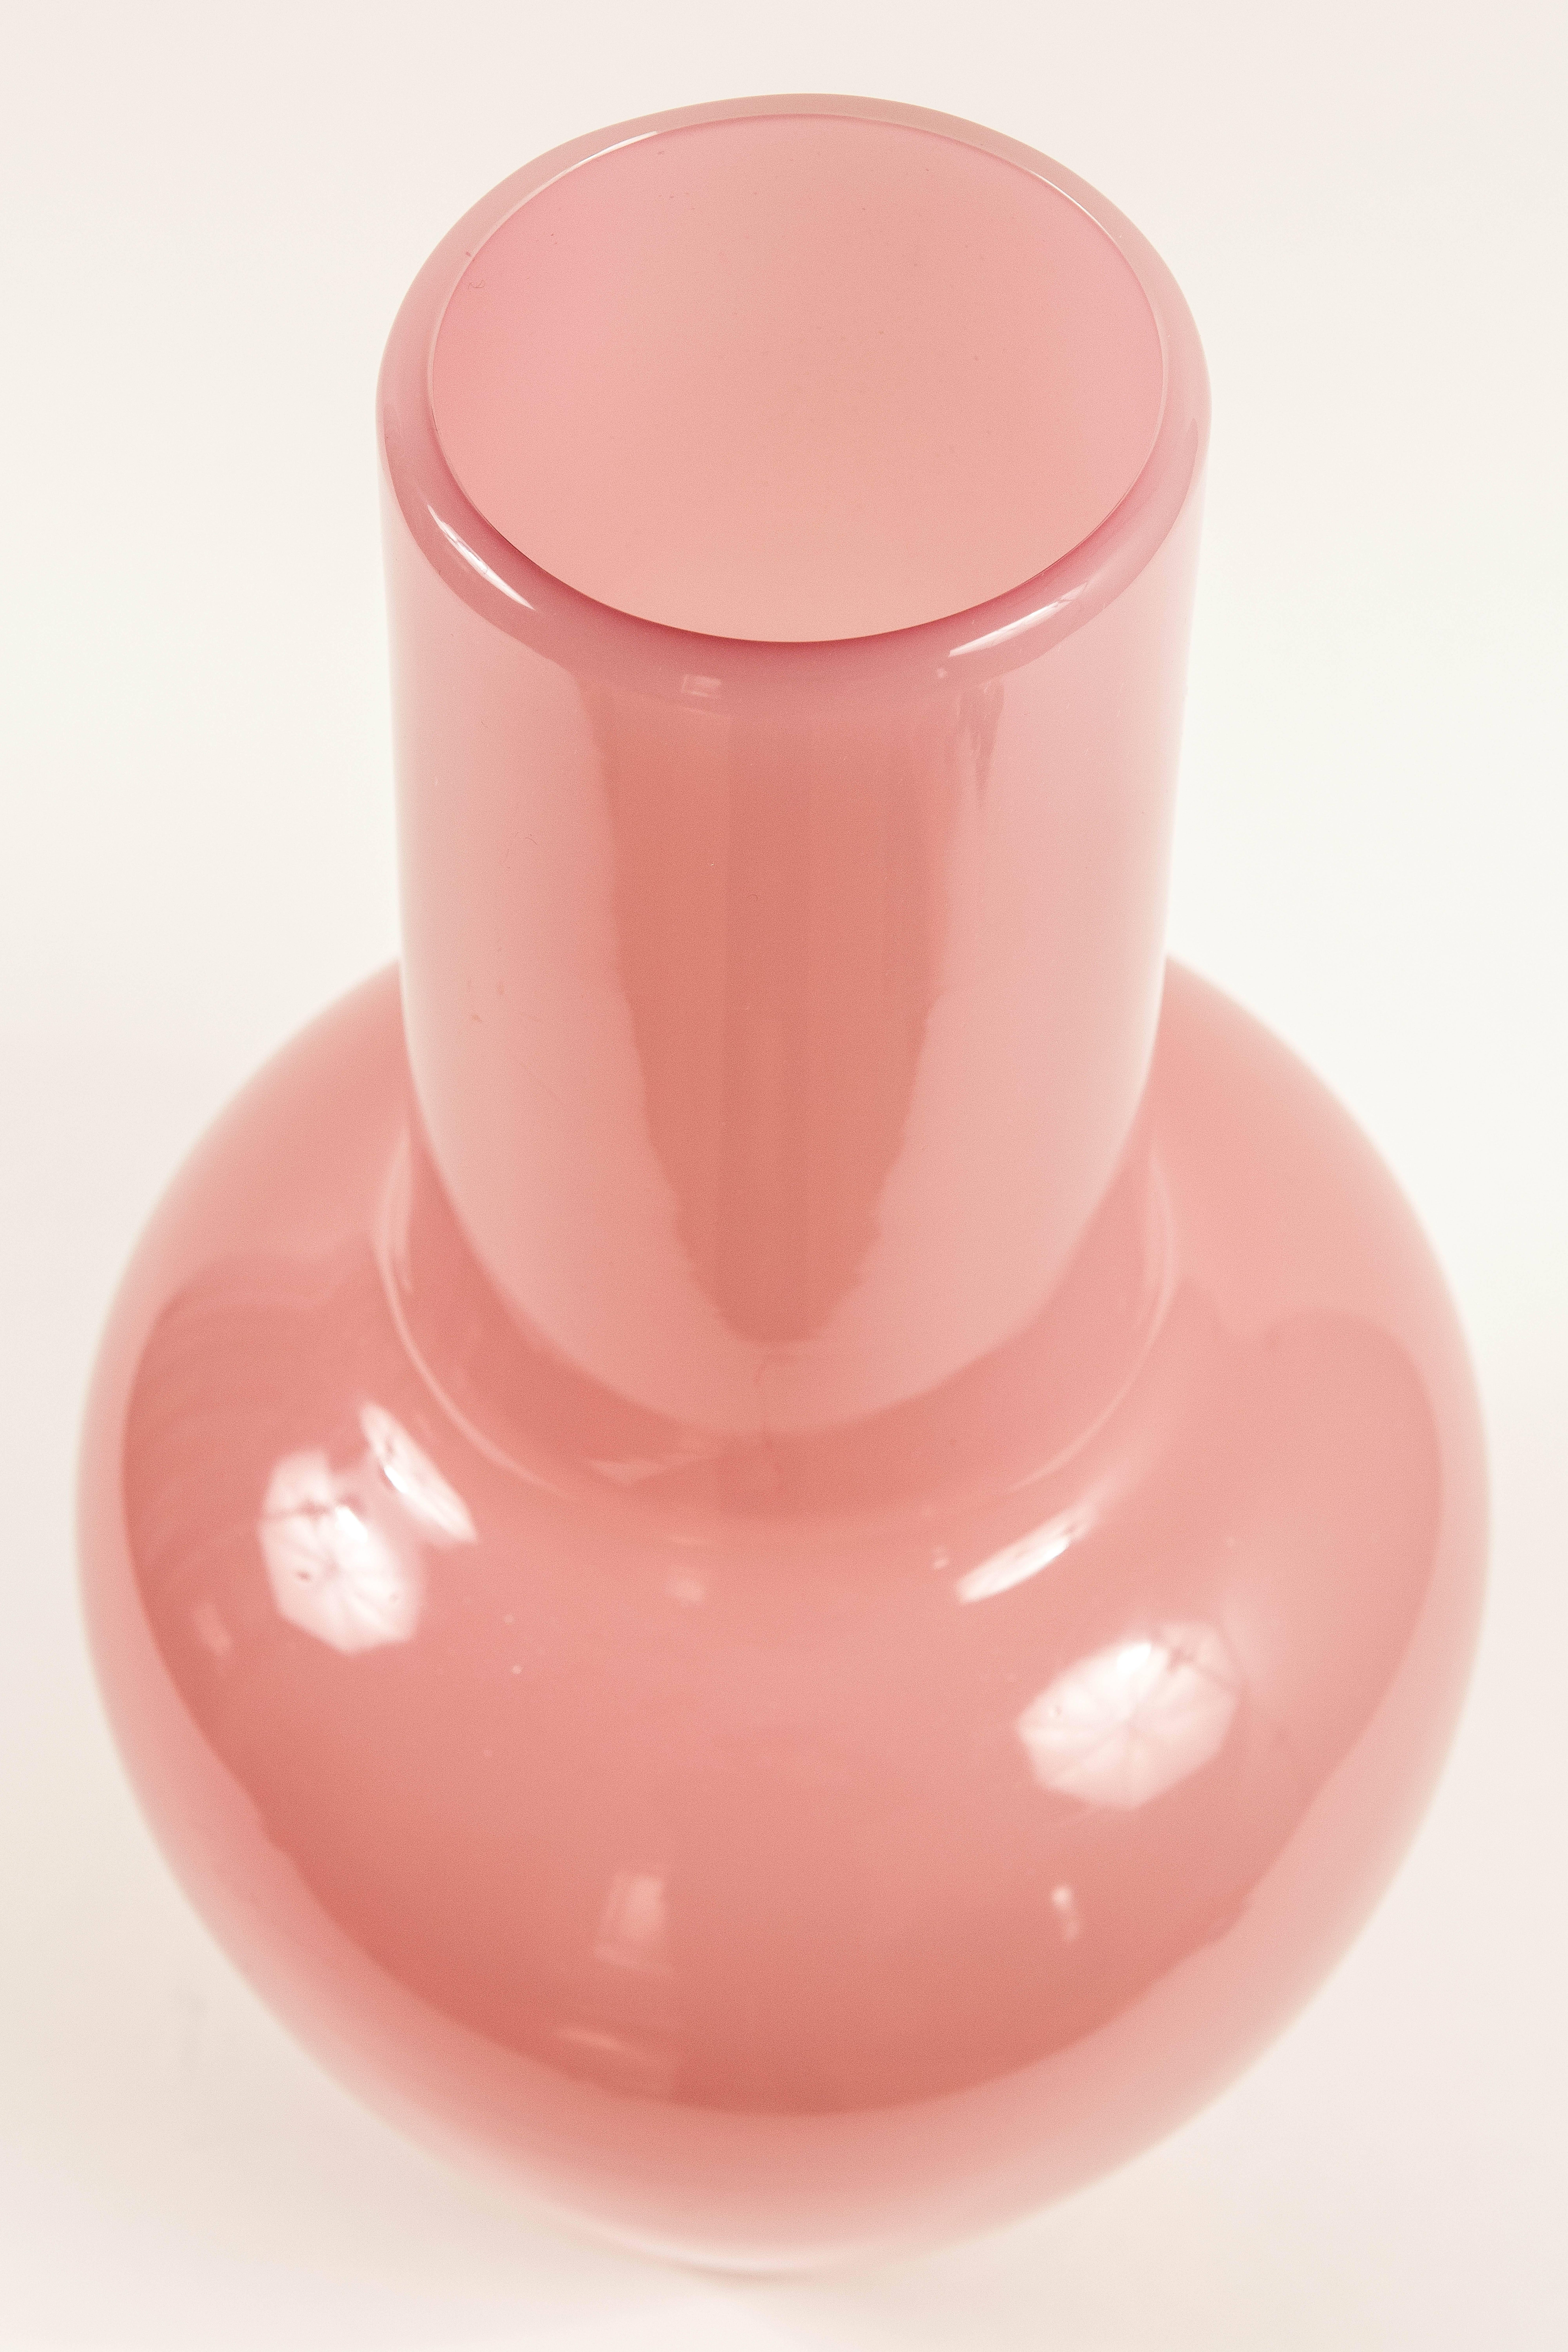 Tall opalina/alabastro pink glass vase designed and made by
Archimede Seguso.
Signed Archimede Seguso Murano.